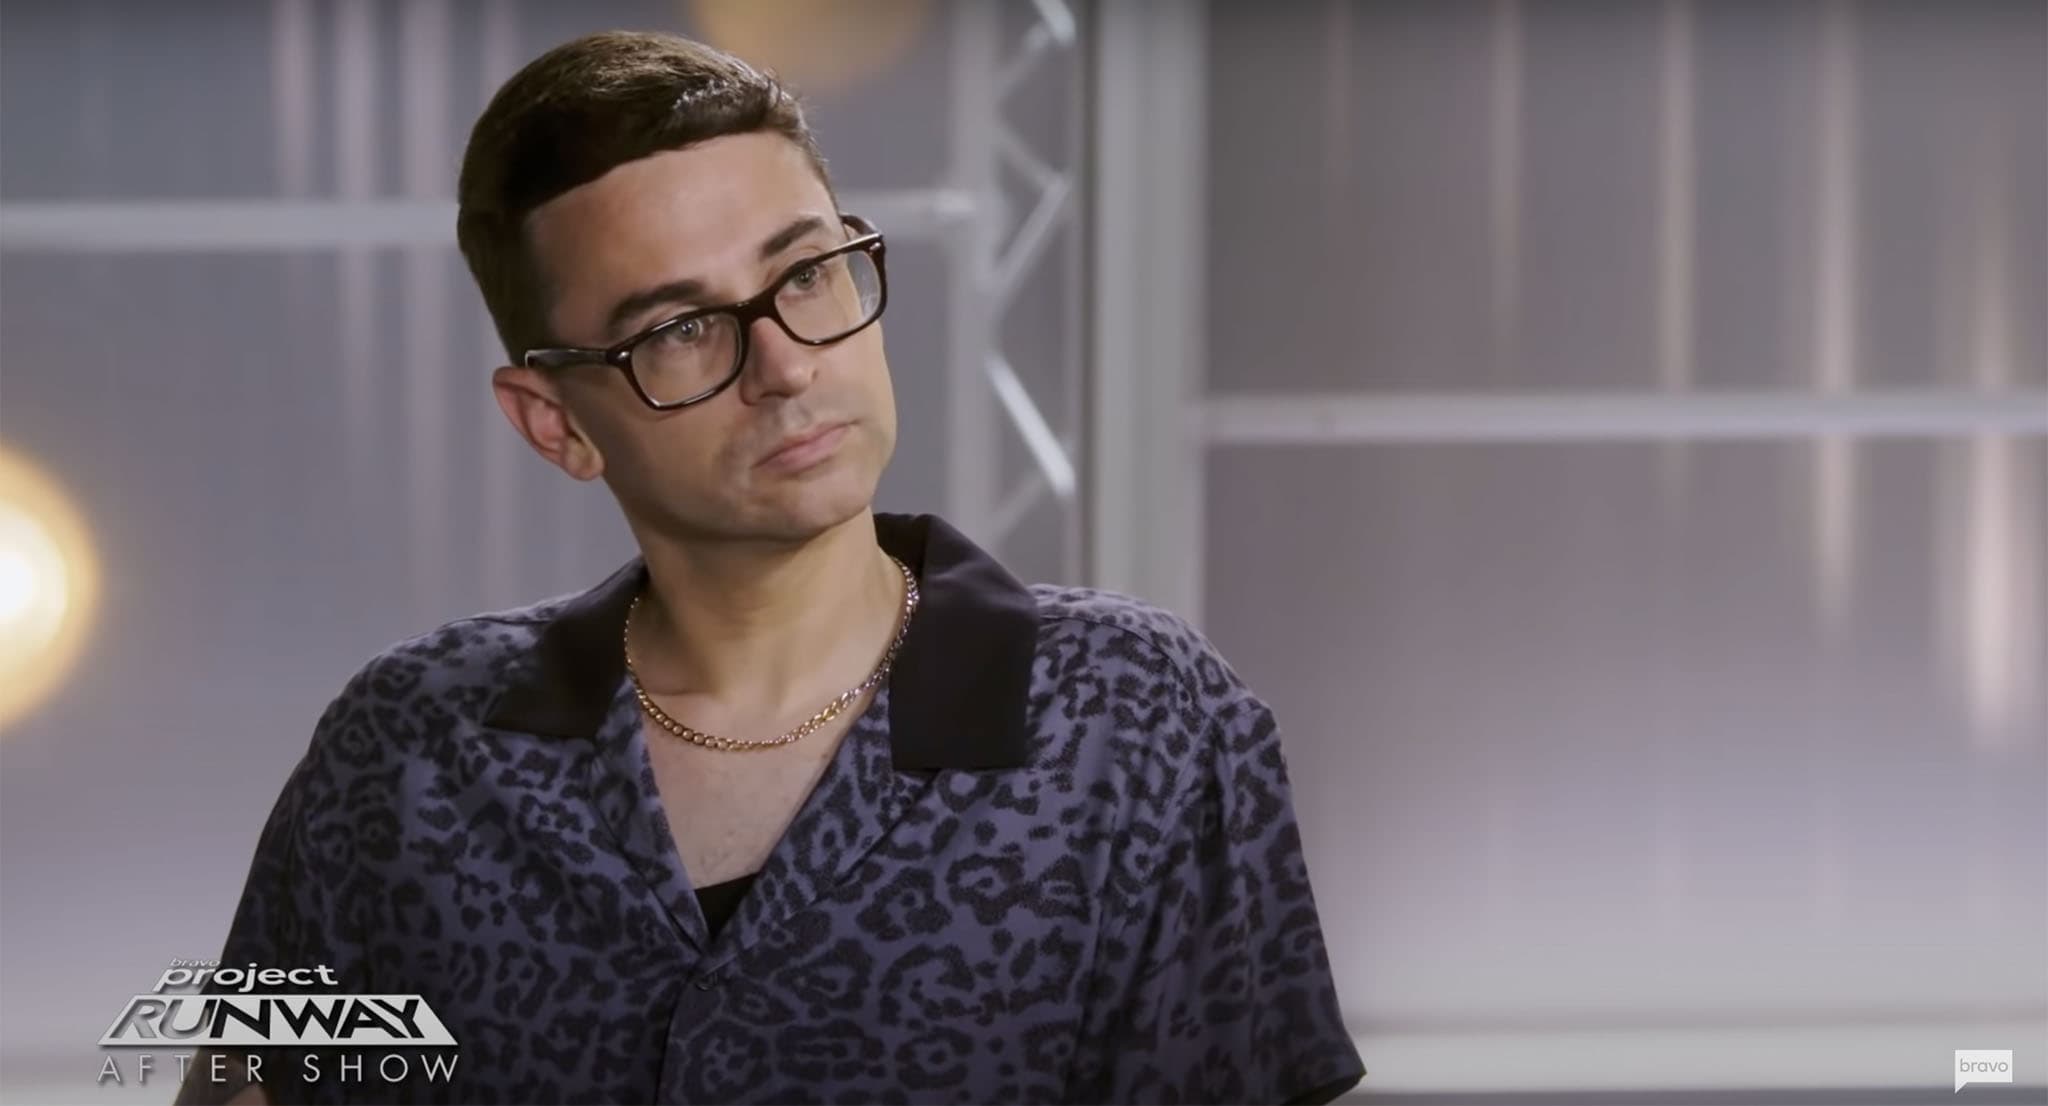 Christian Siriano mentored the designers in seasons 17, 18 and 19 of Project Runway